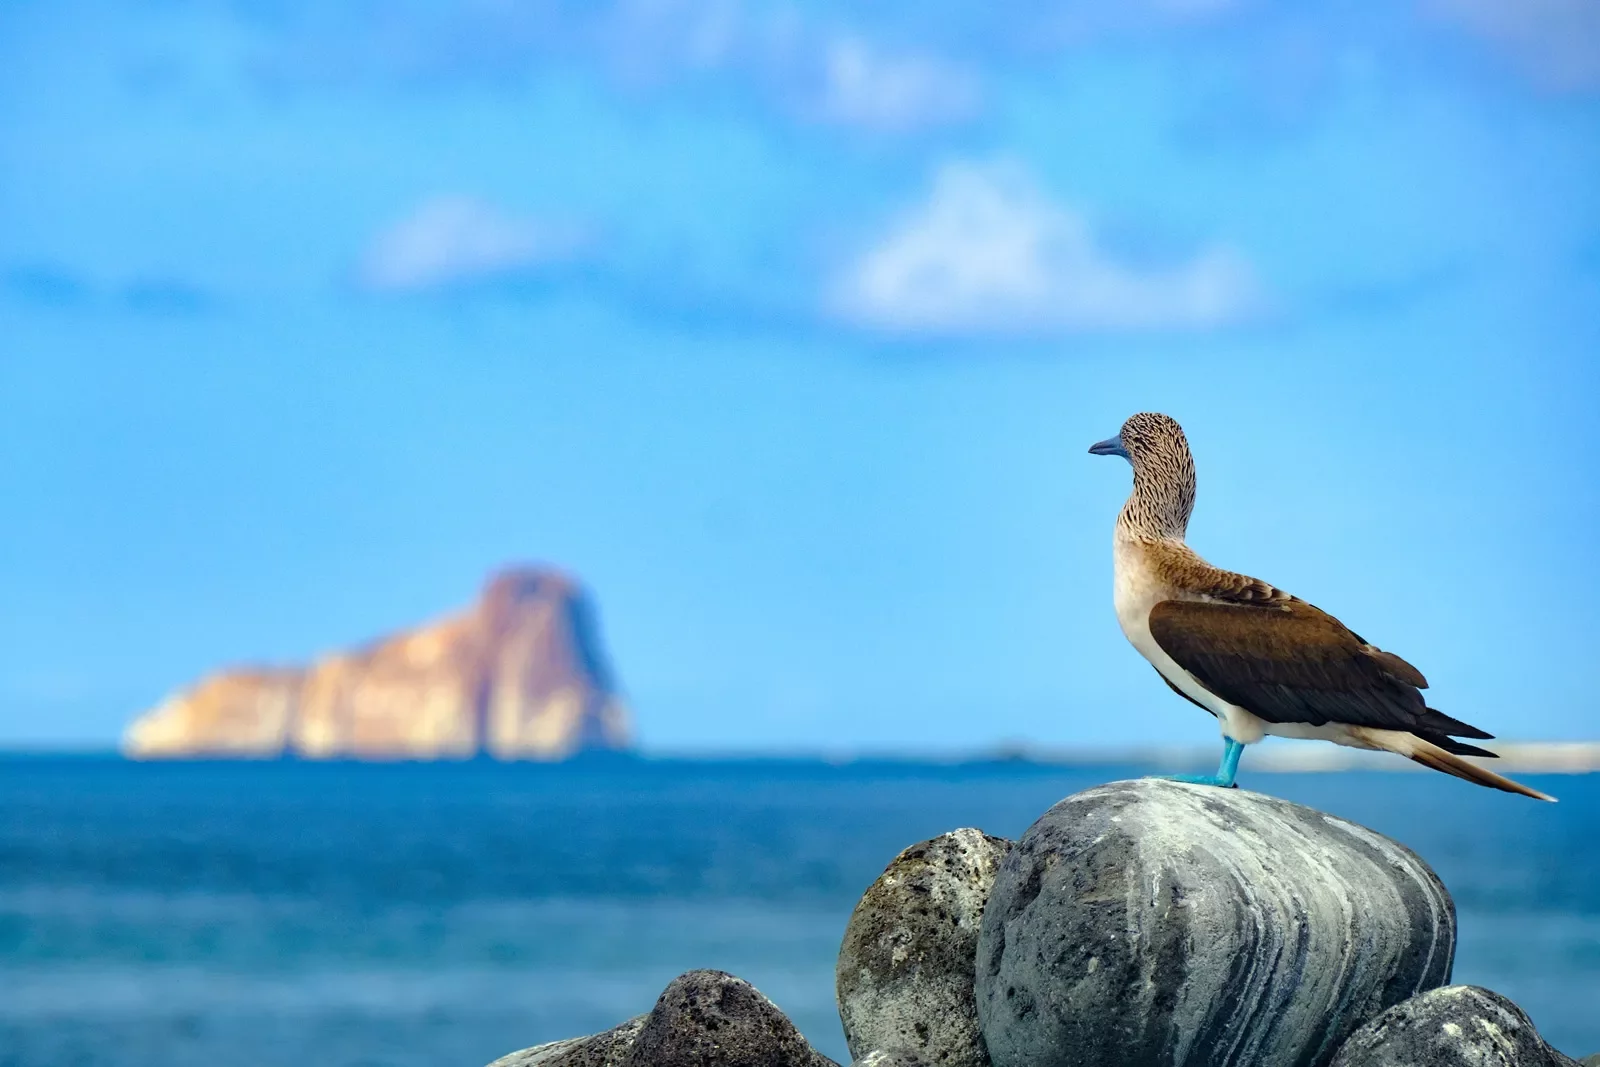 Blue-footed booby standing on a rock by ocean's edge with an island in the background.